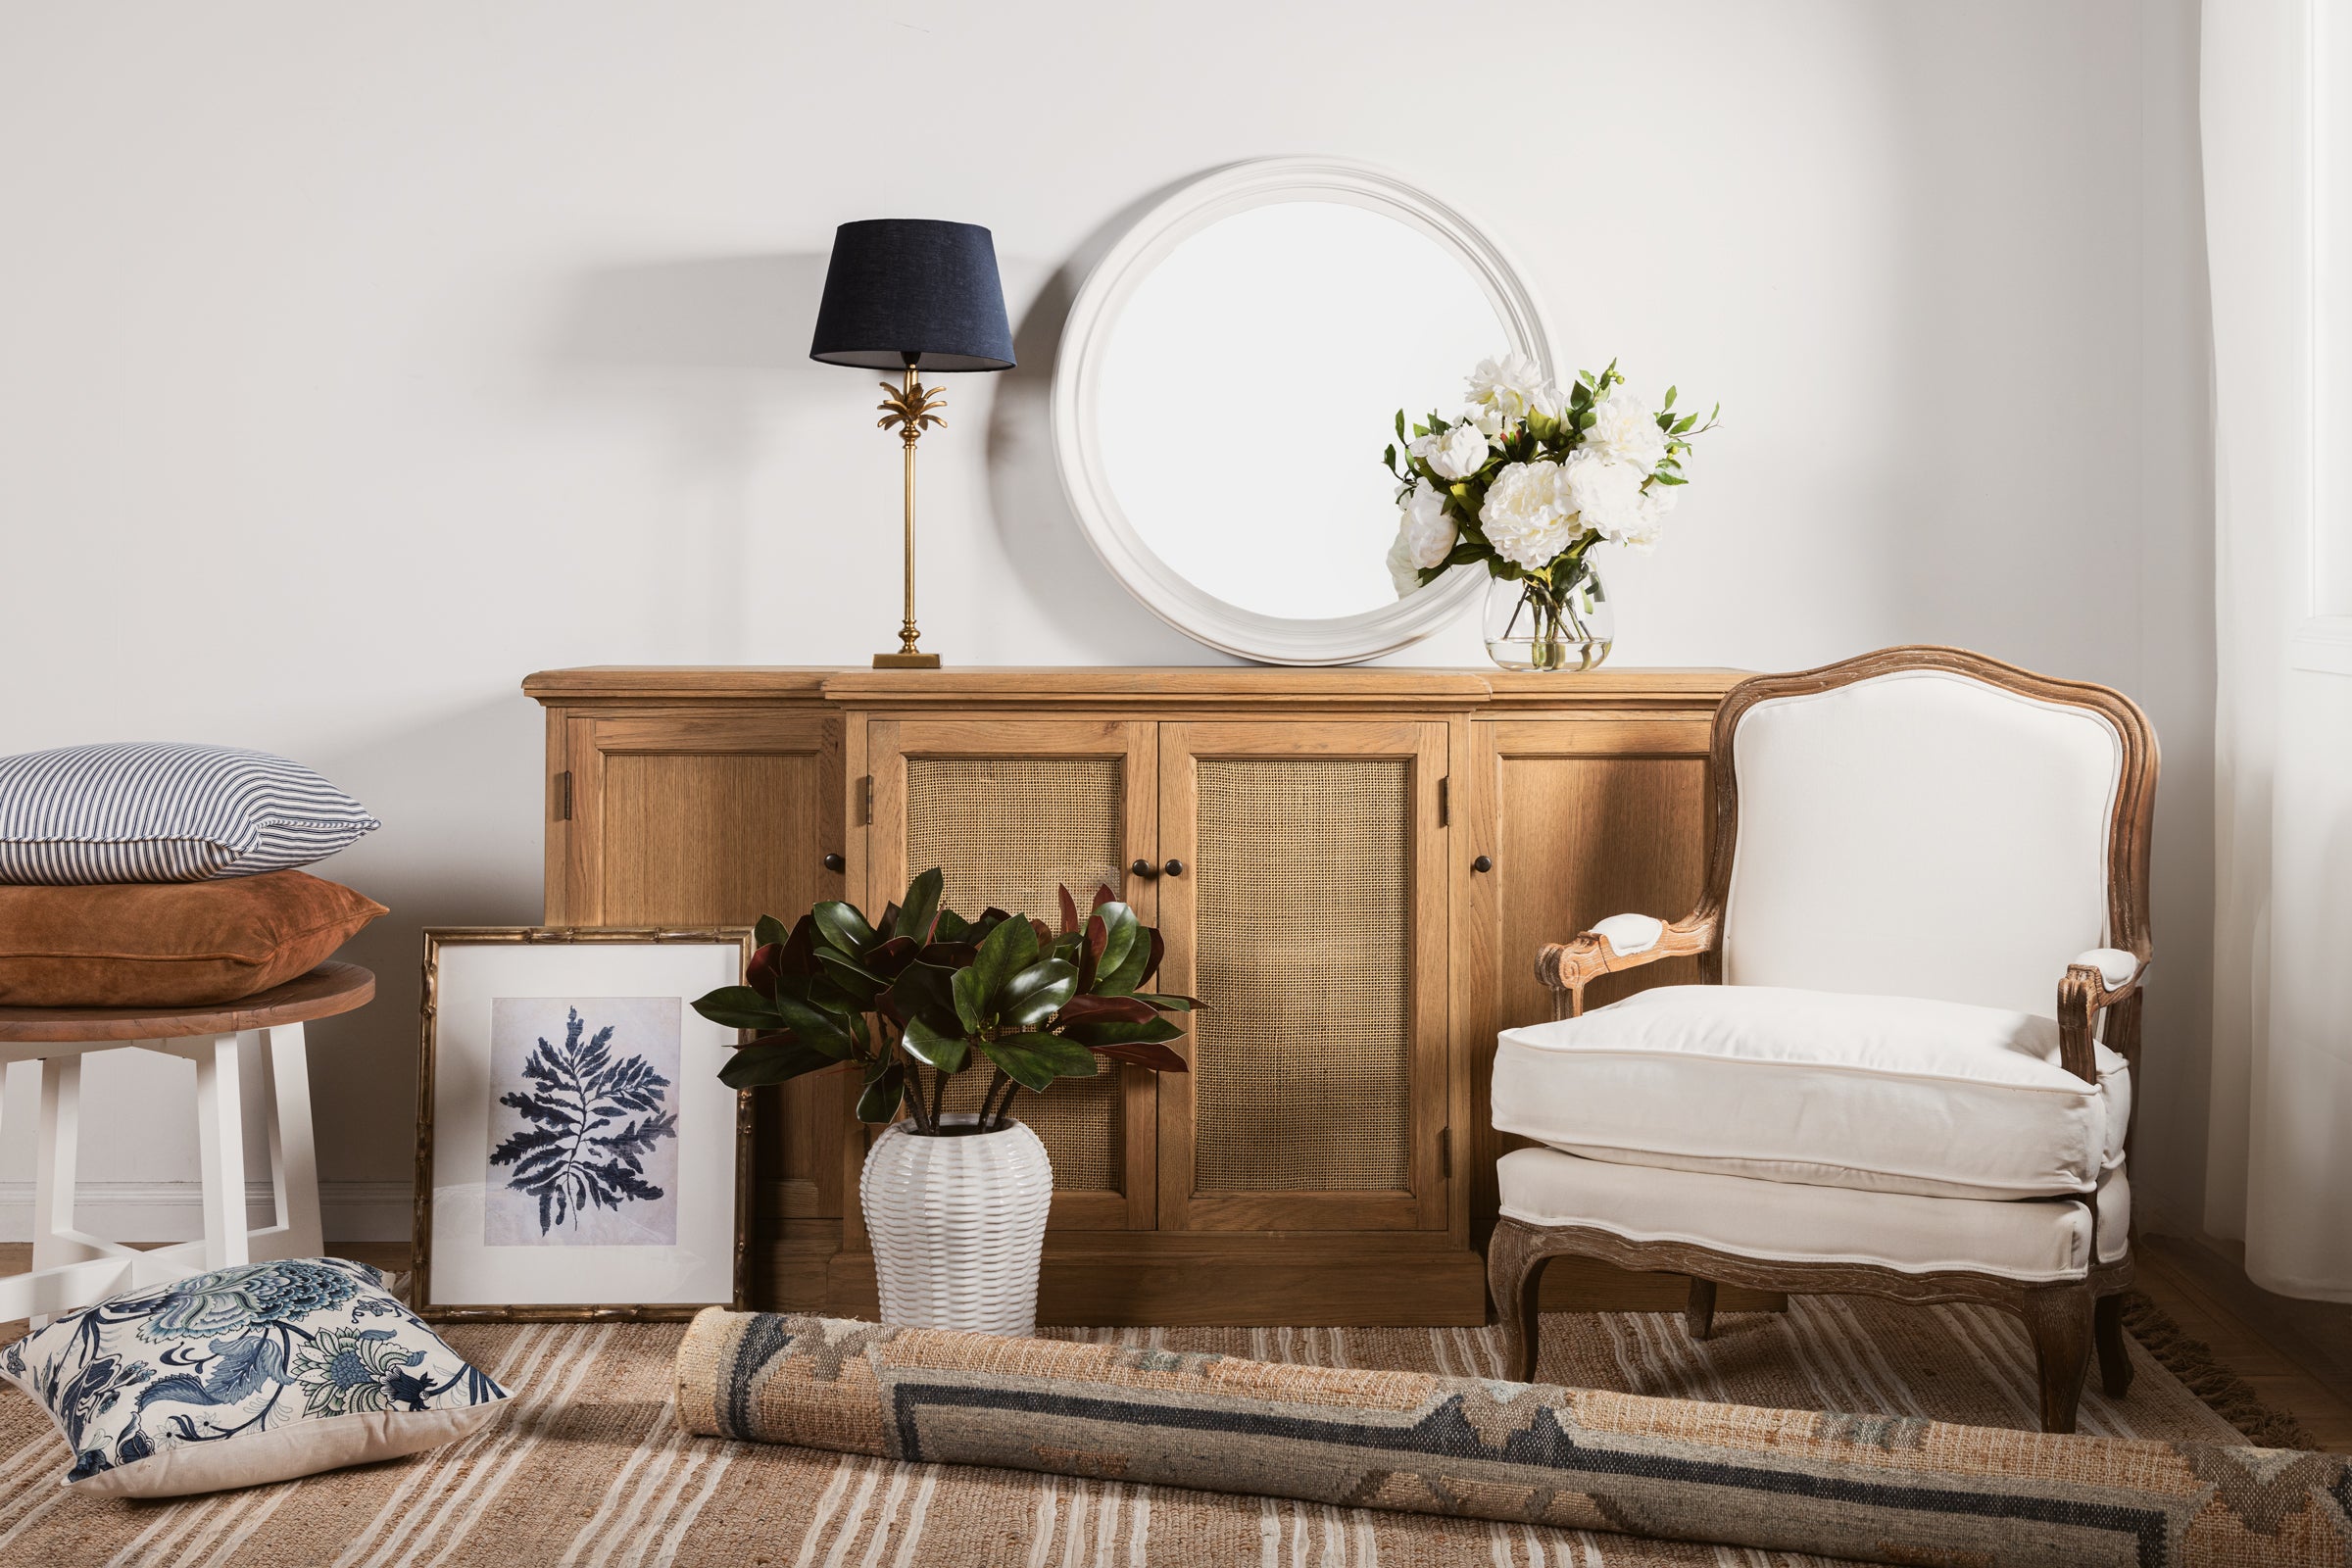 A selection of home décor items including a chair, side board, mirror, lamp and cushions.